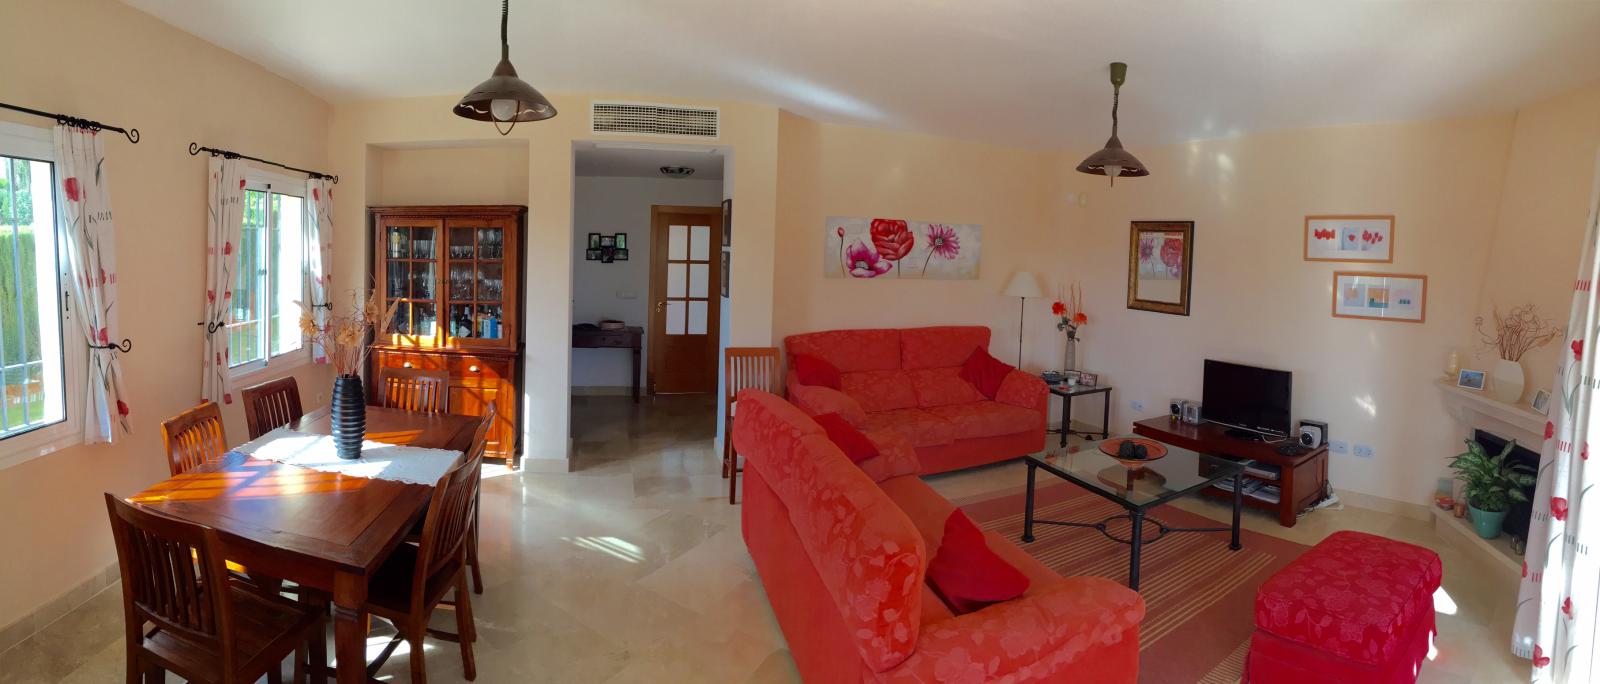 Chalet for holidays in La Alcaidesa